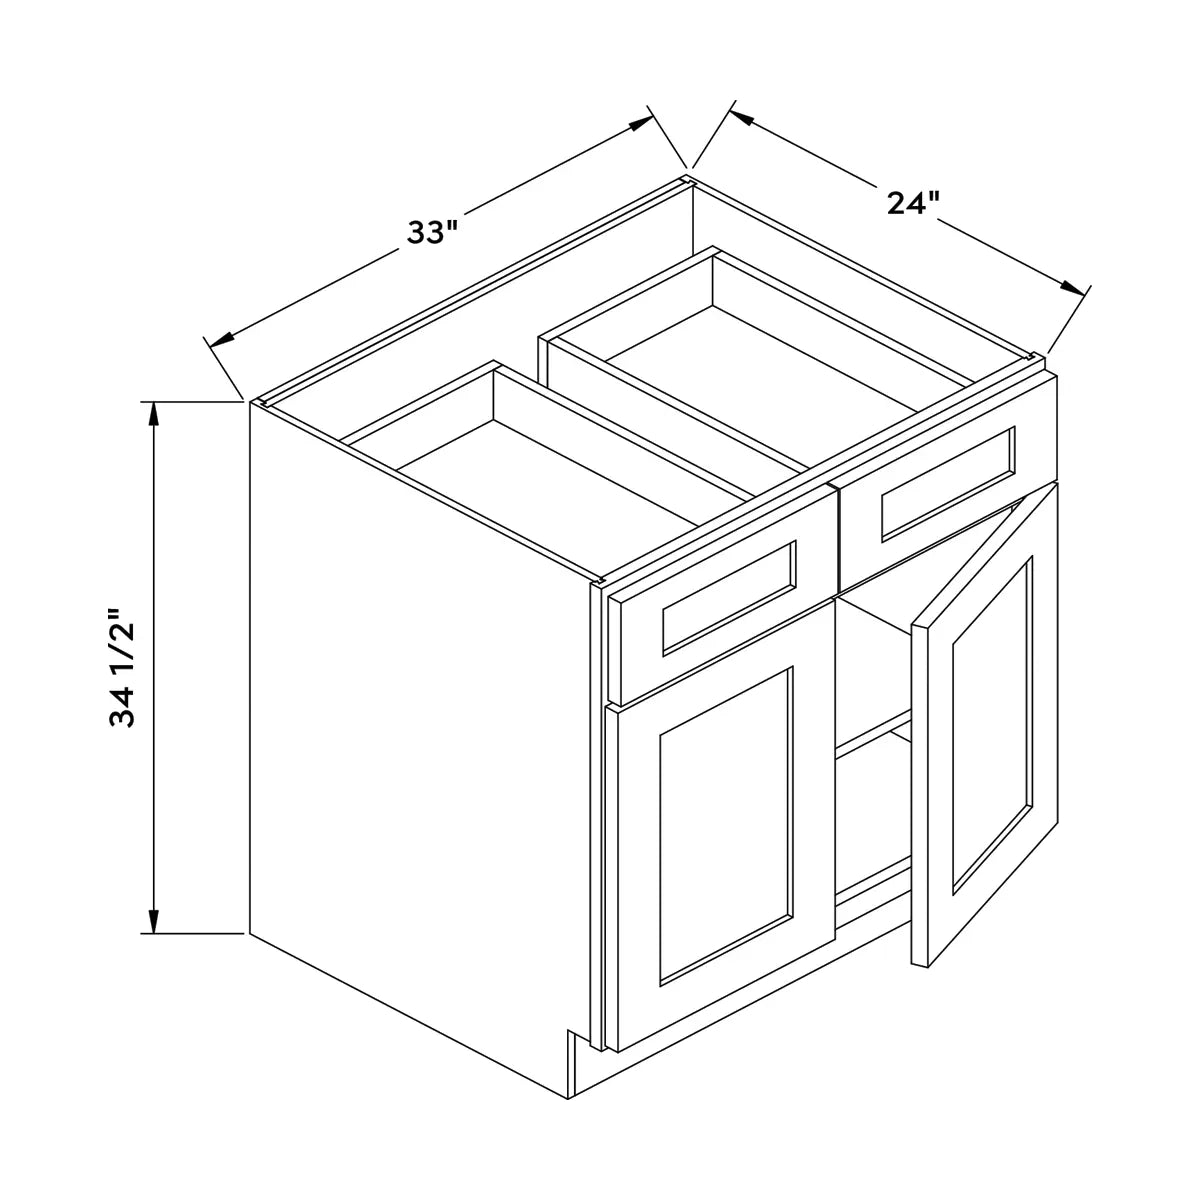 Craft Cabinetry Shaker Aqua 33”W Base Cabinet Image Specifications